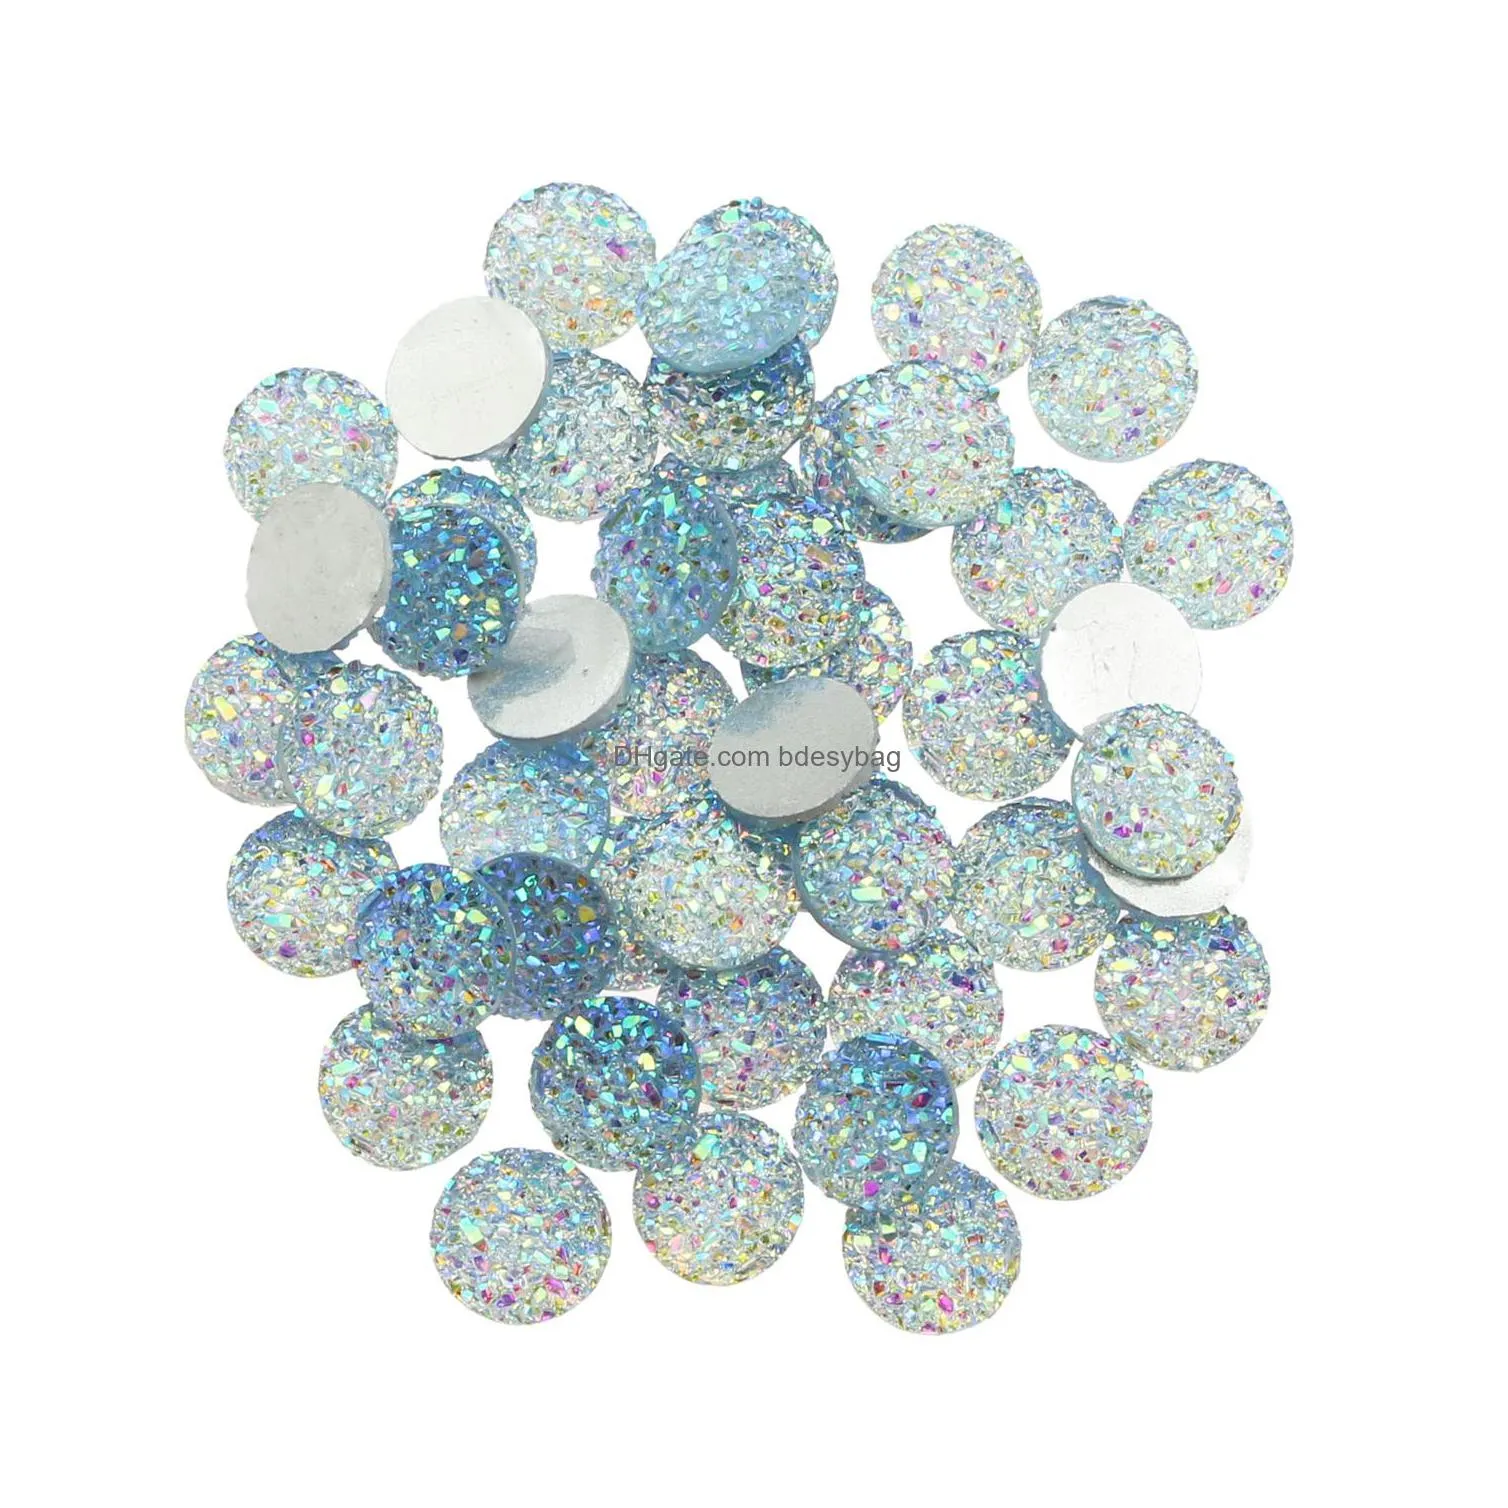 1000pcs 12mm flatback resin druzy round cabochons cameo for charms pendant bracelet jewelry diy making accessory findings